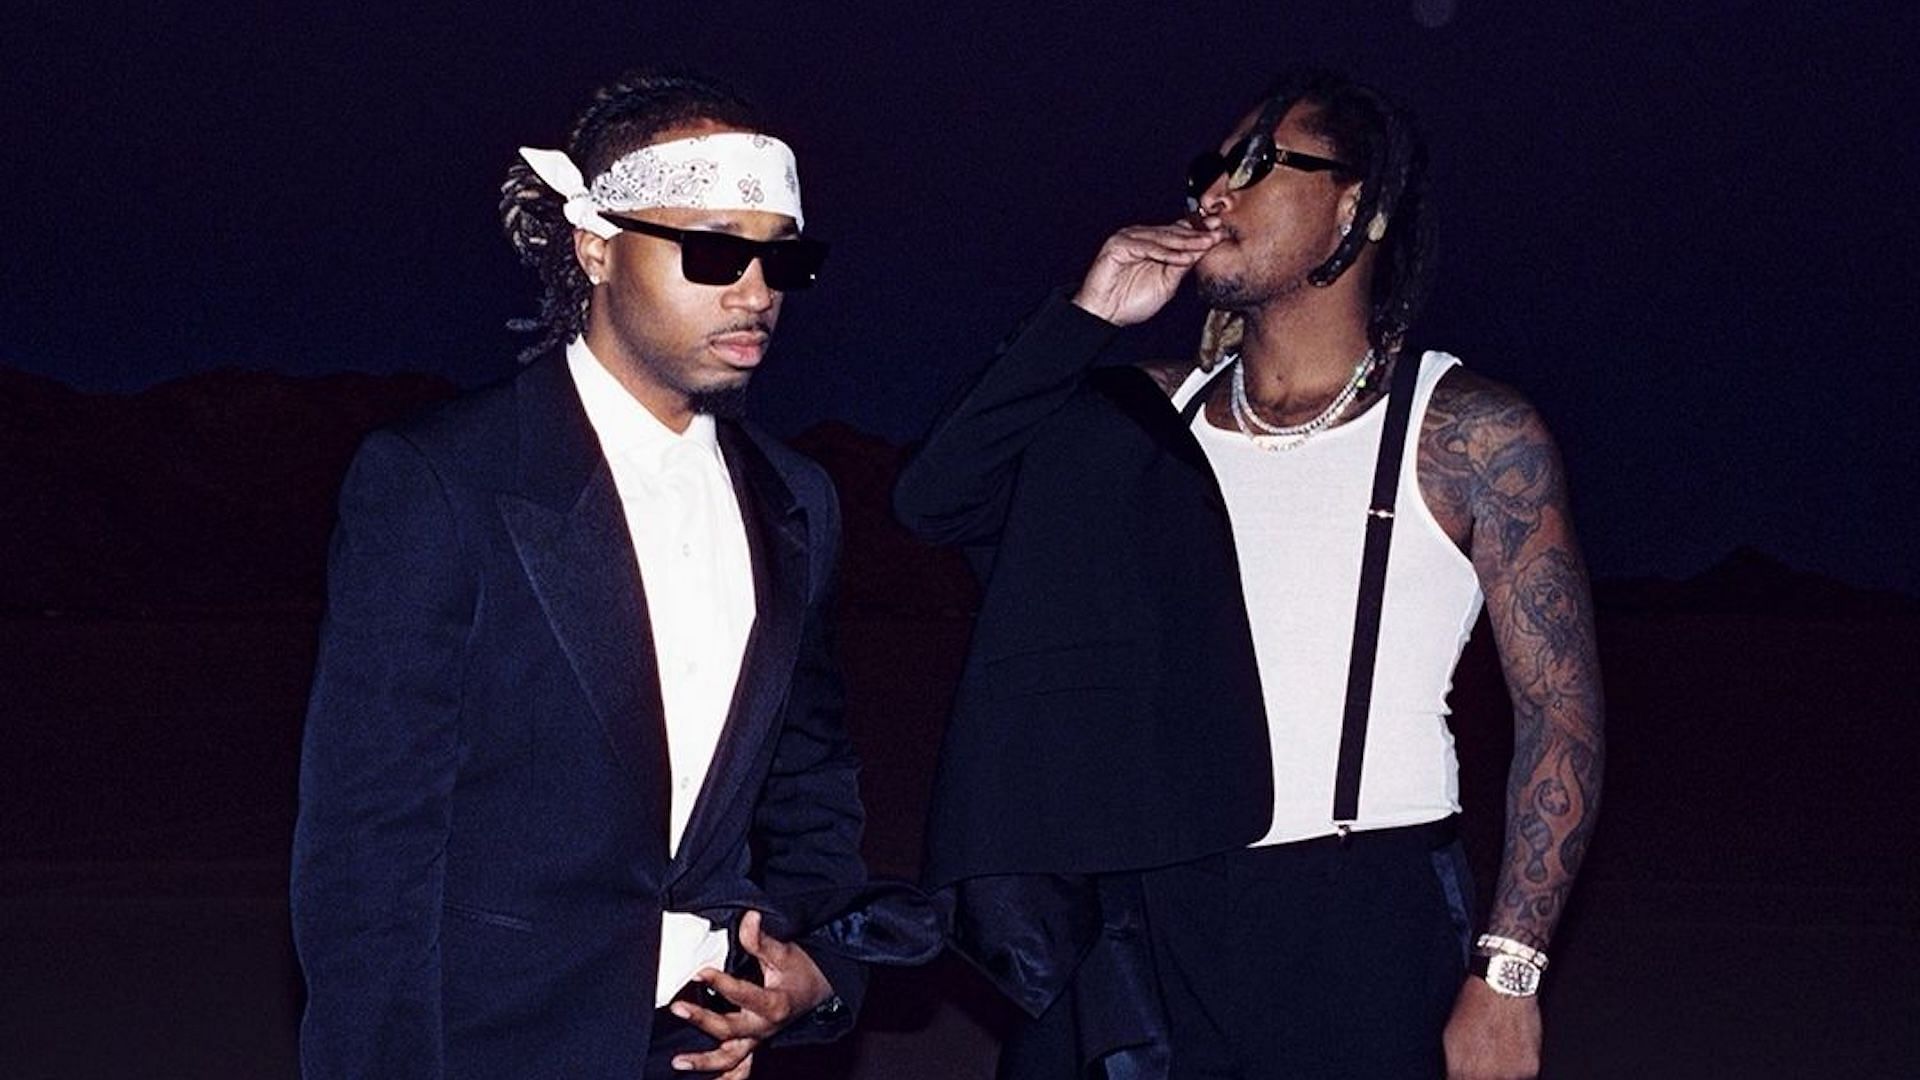 The official album cover for Metro Boomin and Future&#039;s album &#039;We Don&#039;t Trust You&#039; (Image via Instagram/@metroboomin)